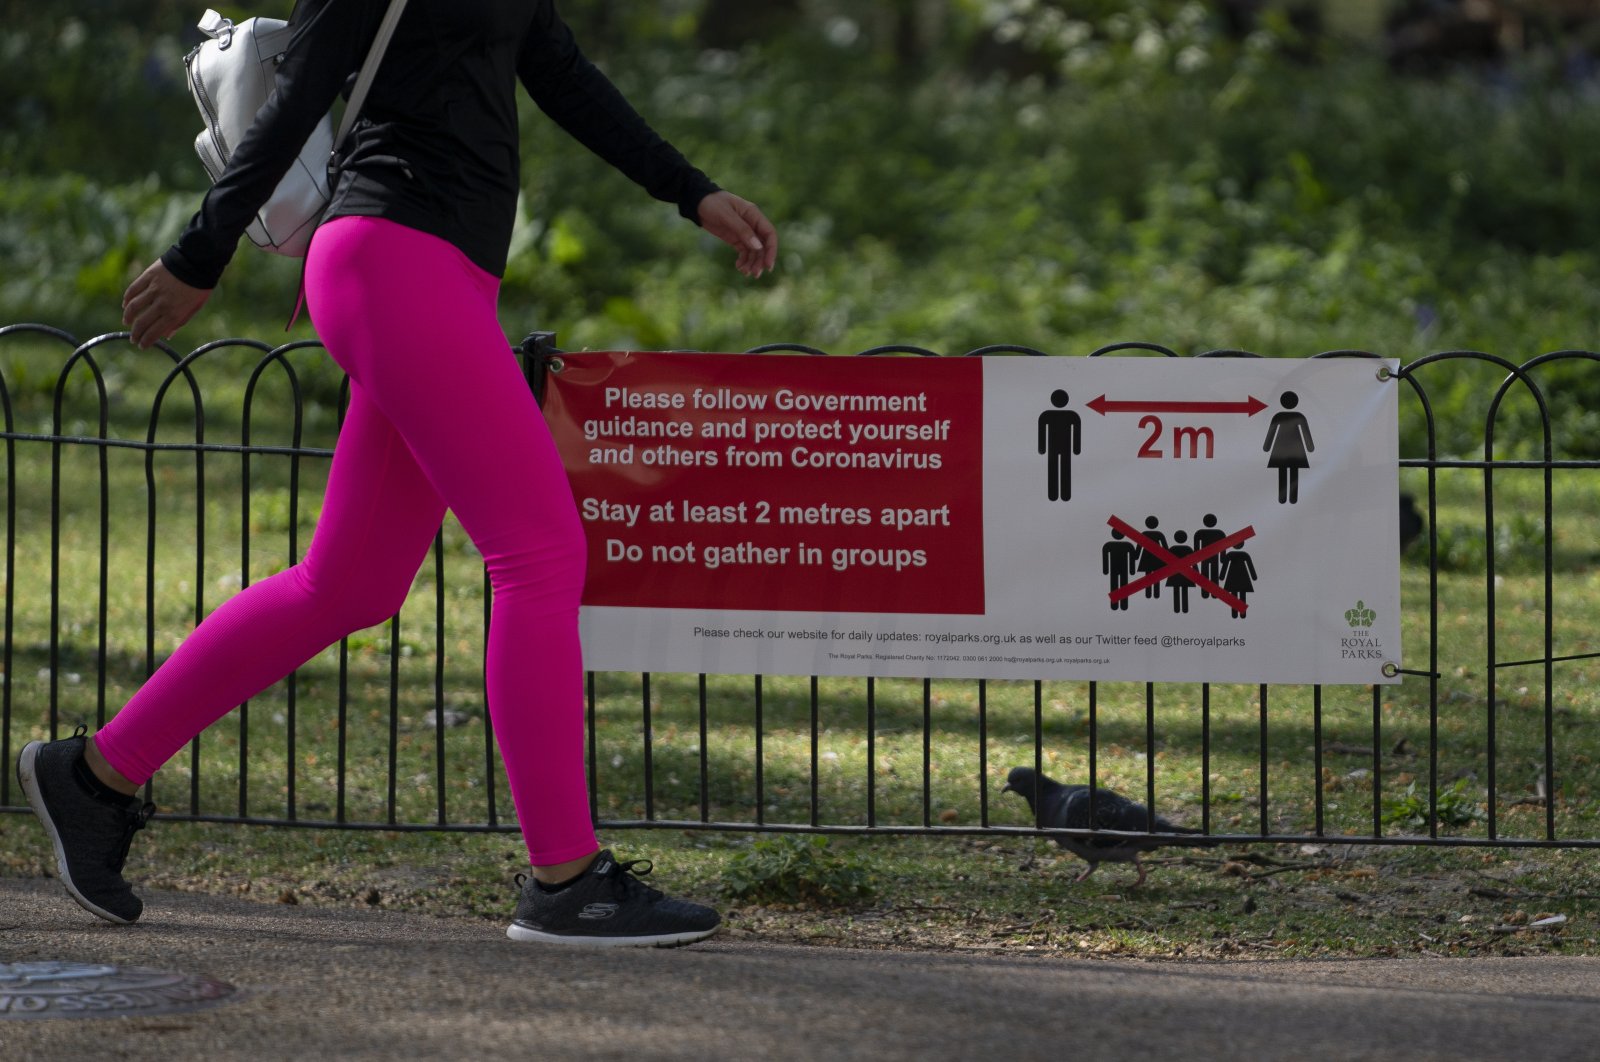 A general view of signage in St James Park, Central London Britain, Monday, April 13, 2020. (EPA Photo)